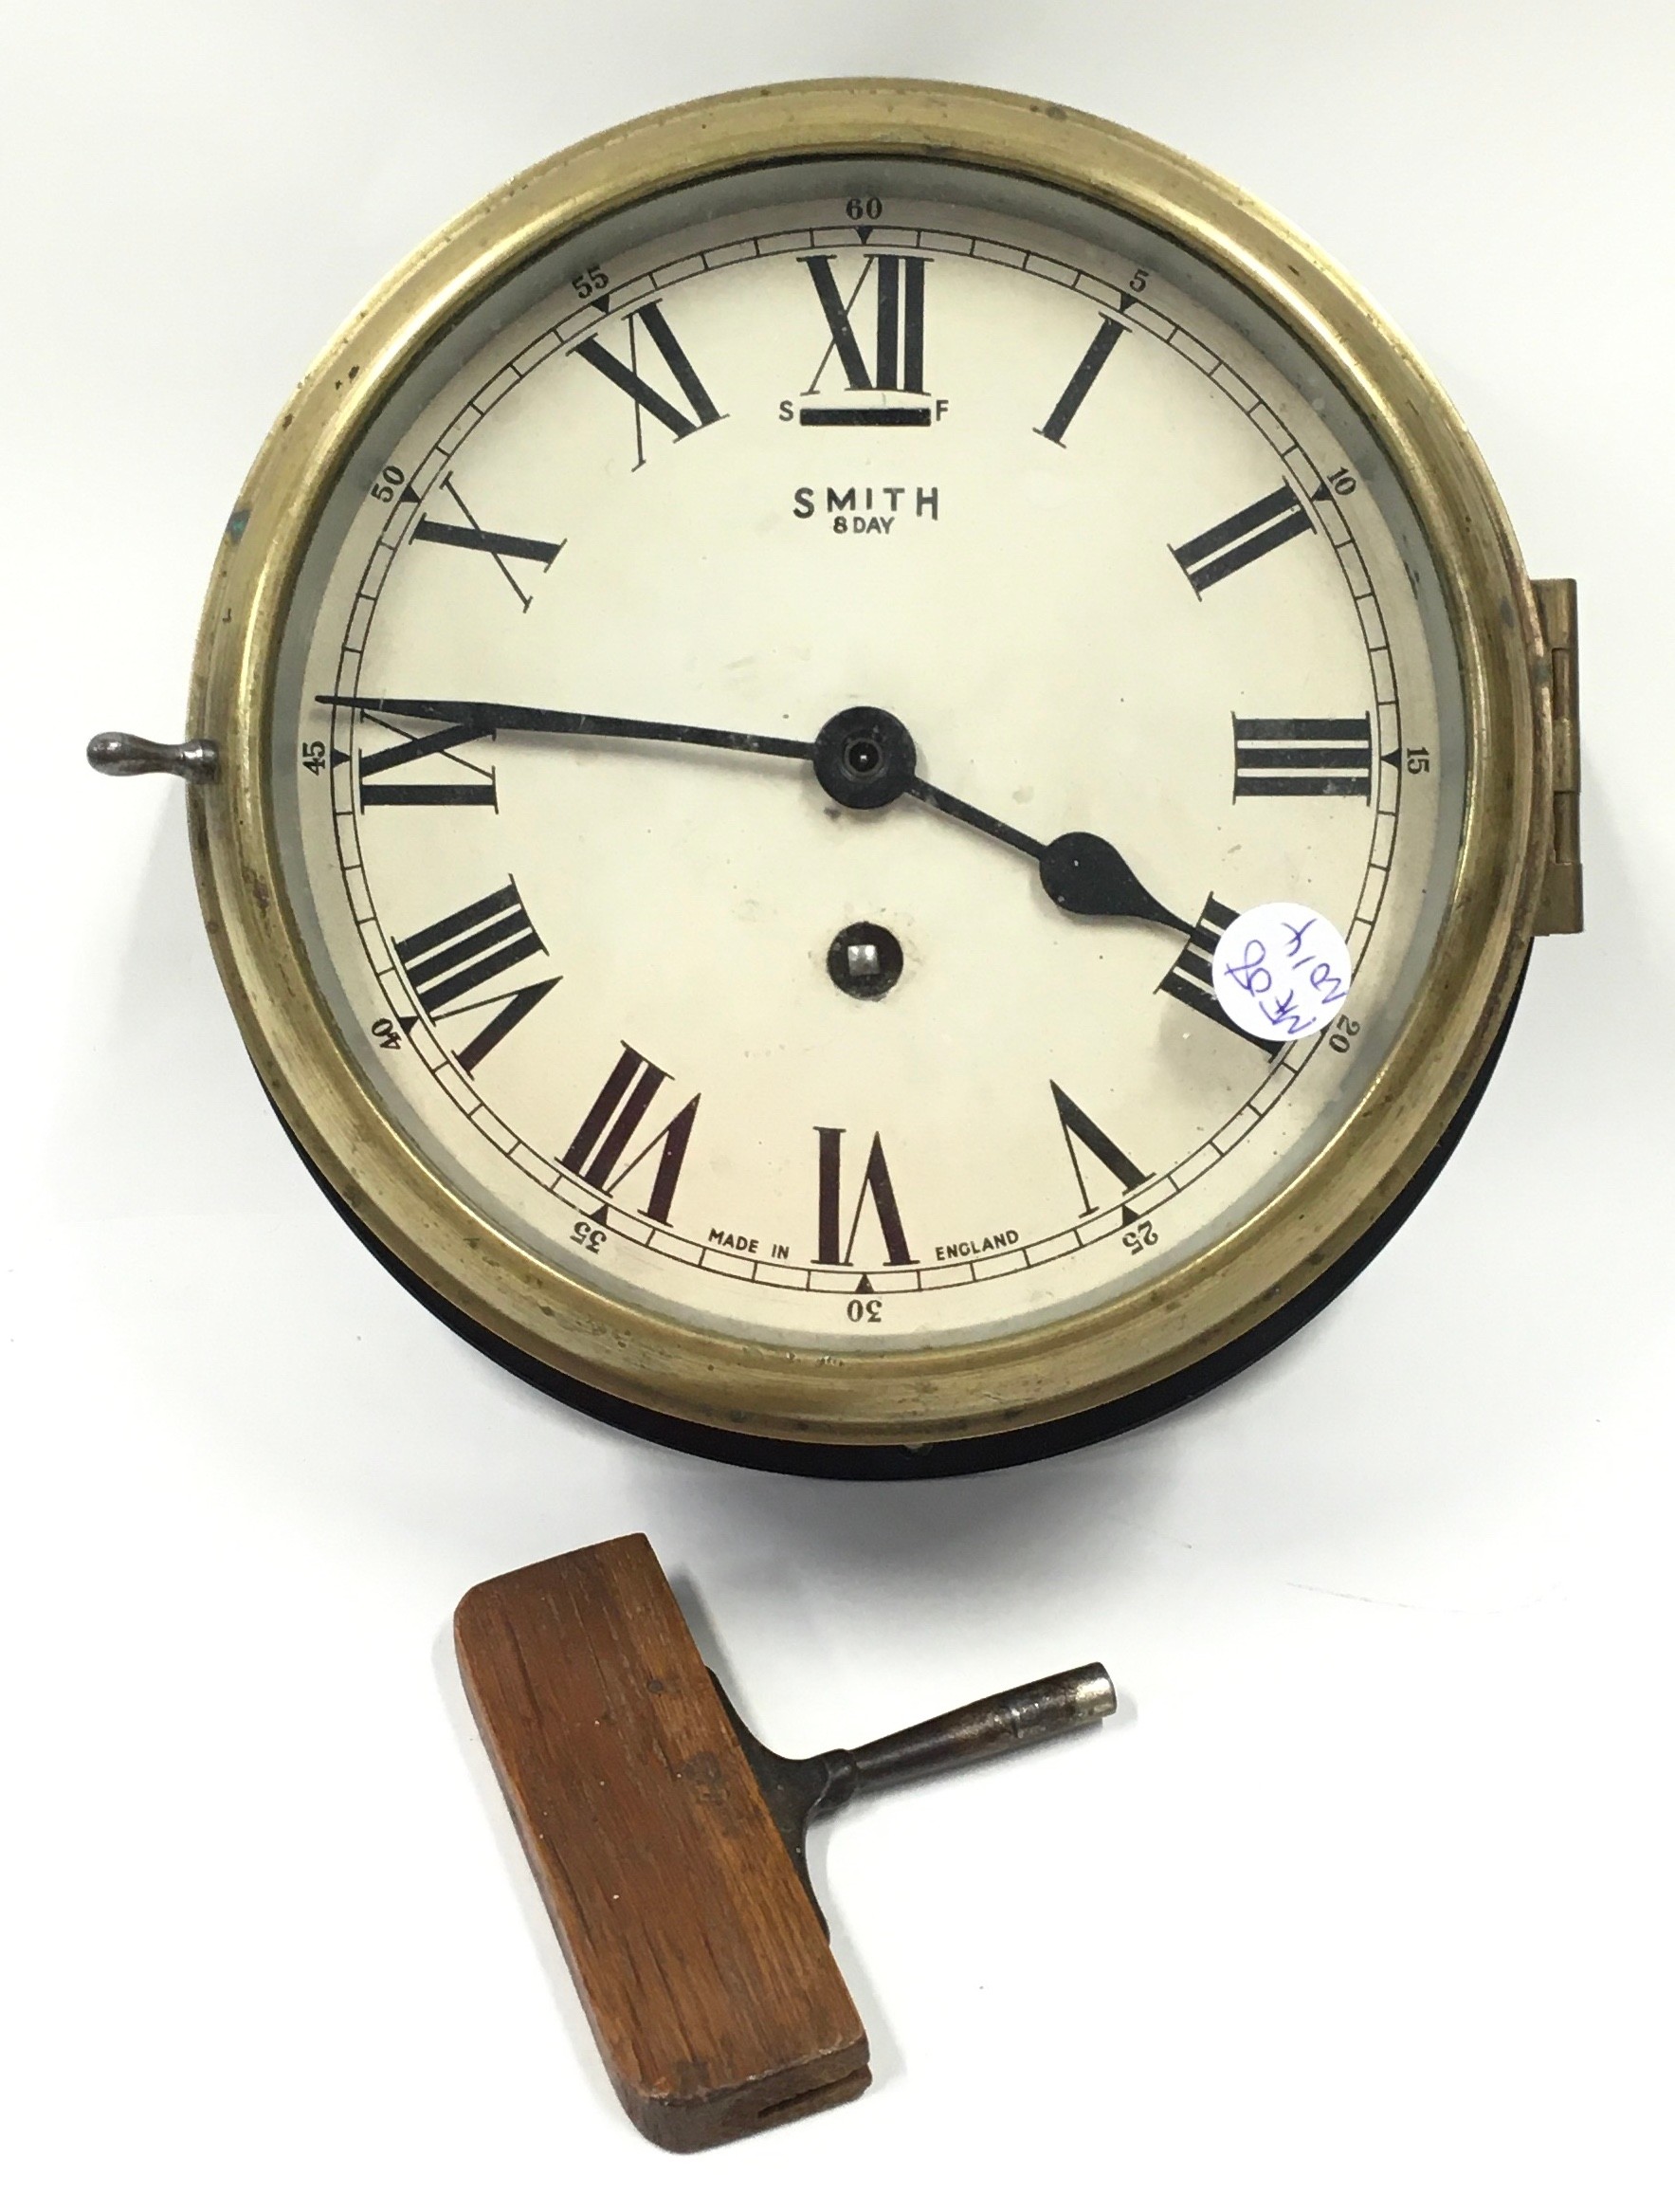 Royal Navy military marked Smith 8 day large deck clock working with key, face 19cm depth 12cm